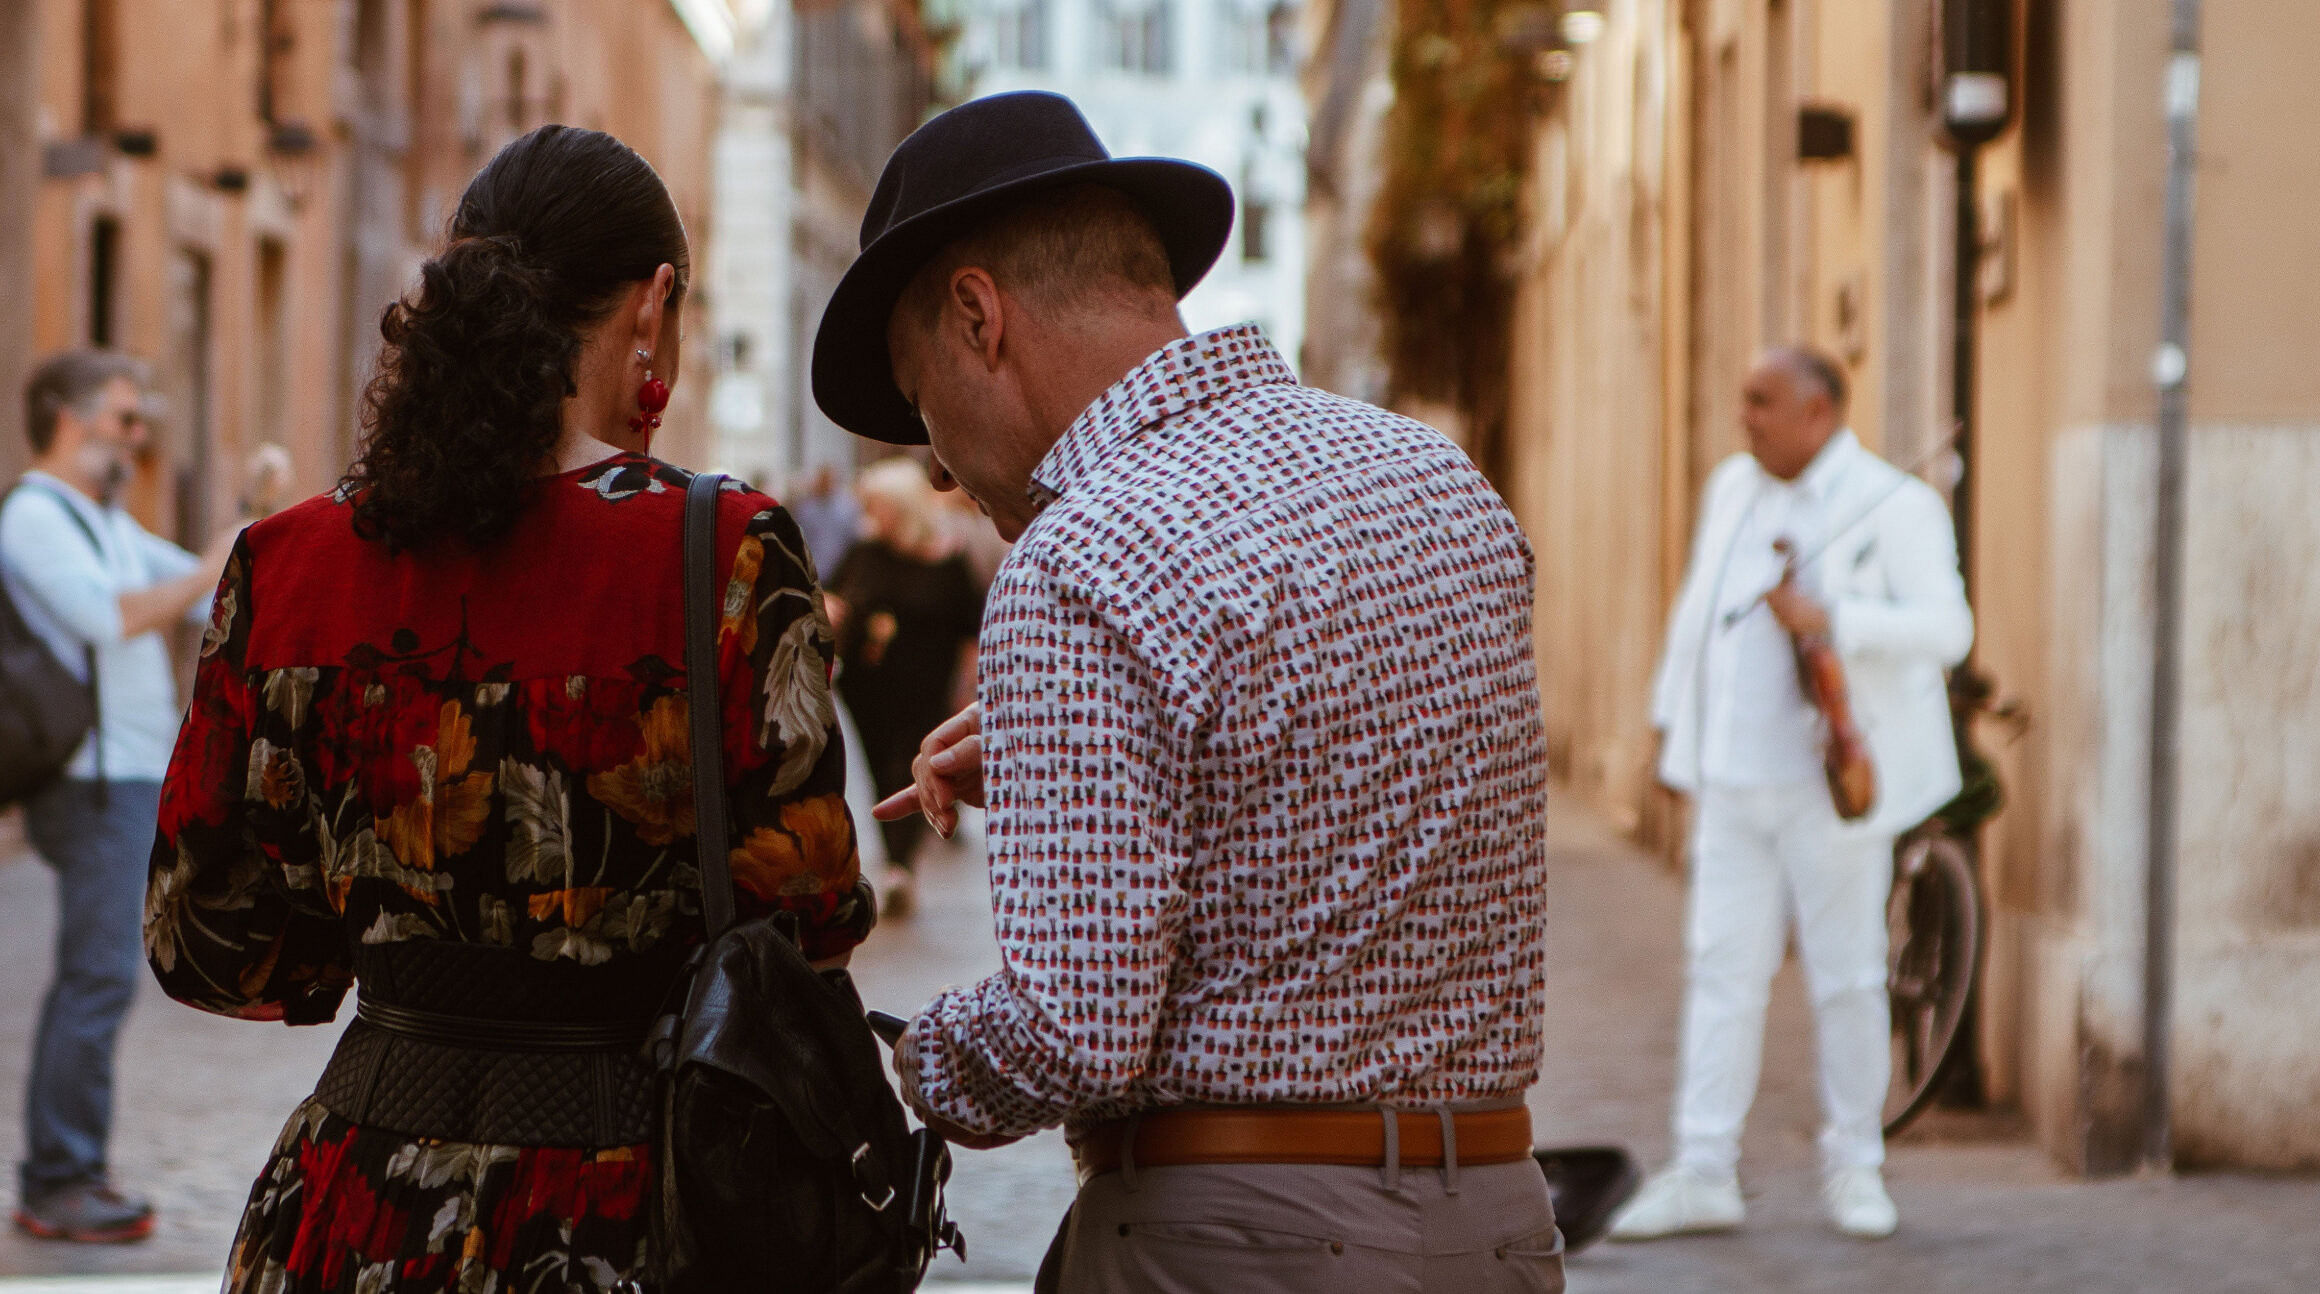 Man and woman in Italy talking